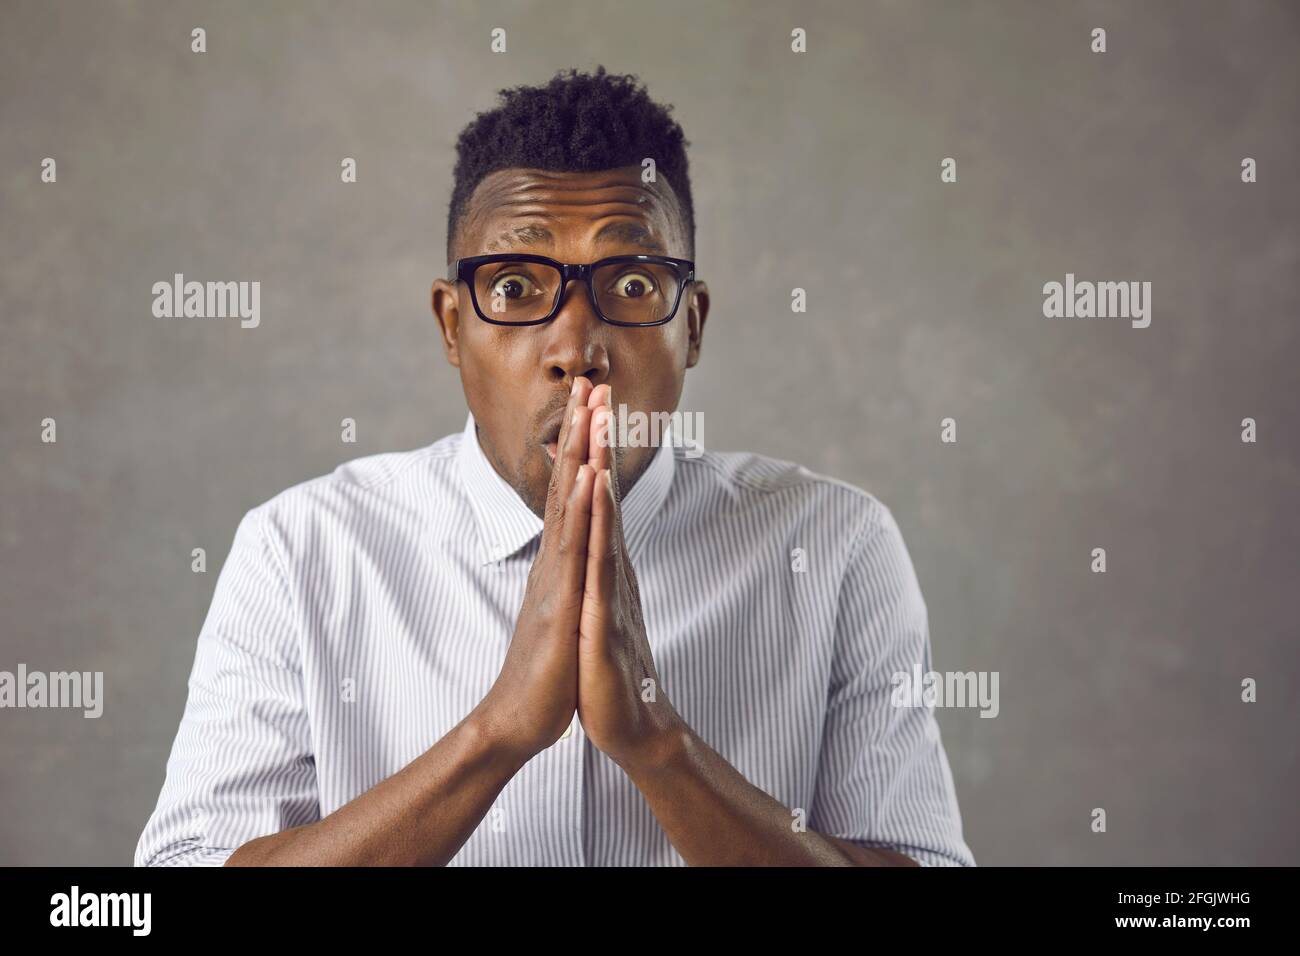 Studio portrait of shocked young African American man in glasses looking at camera Stock Photo